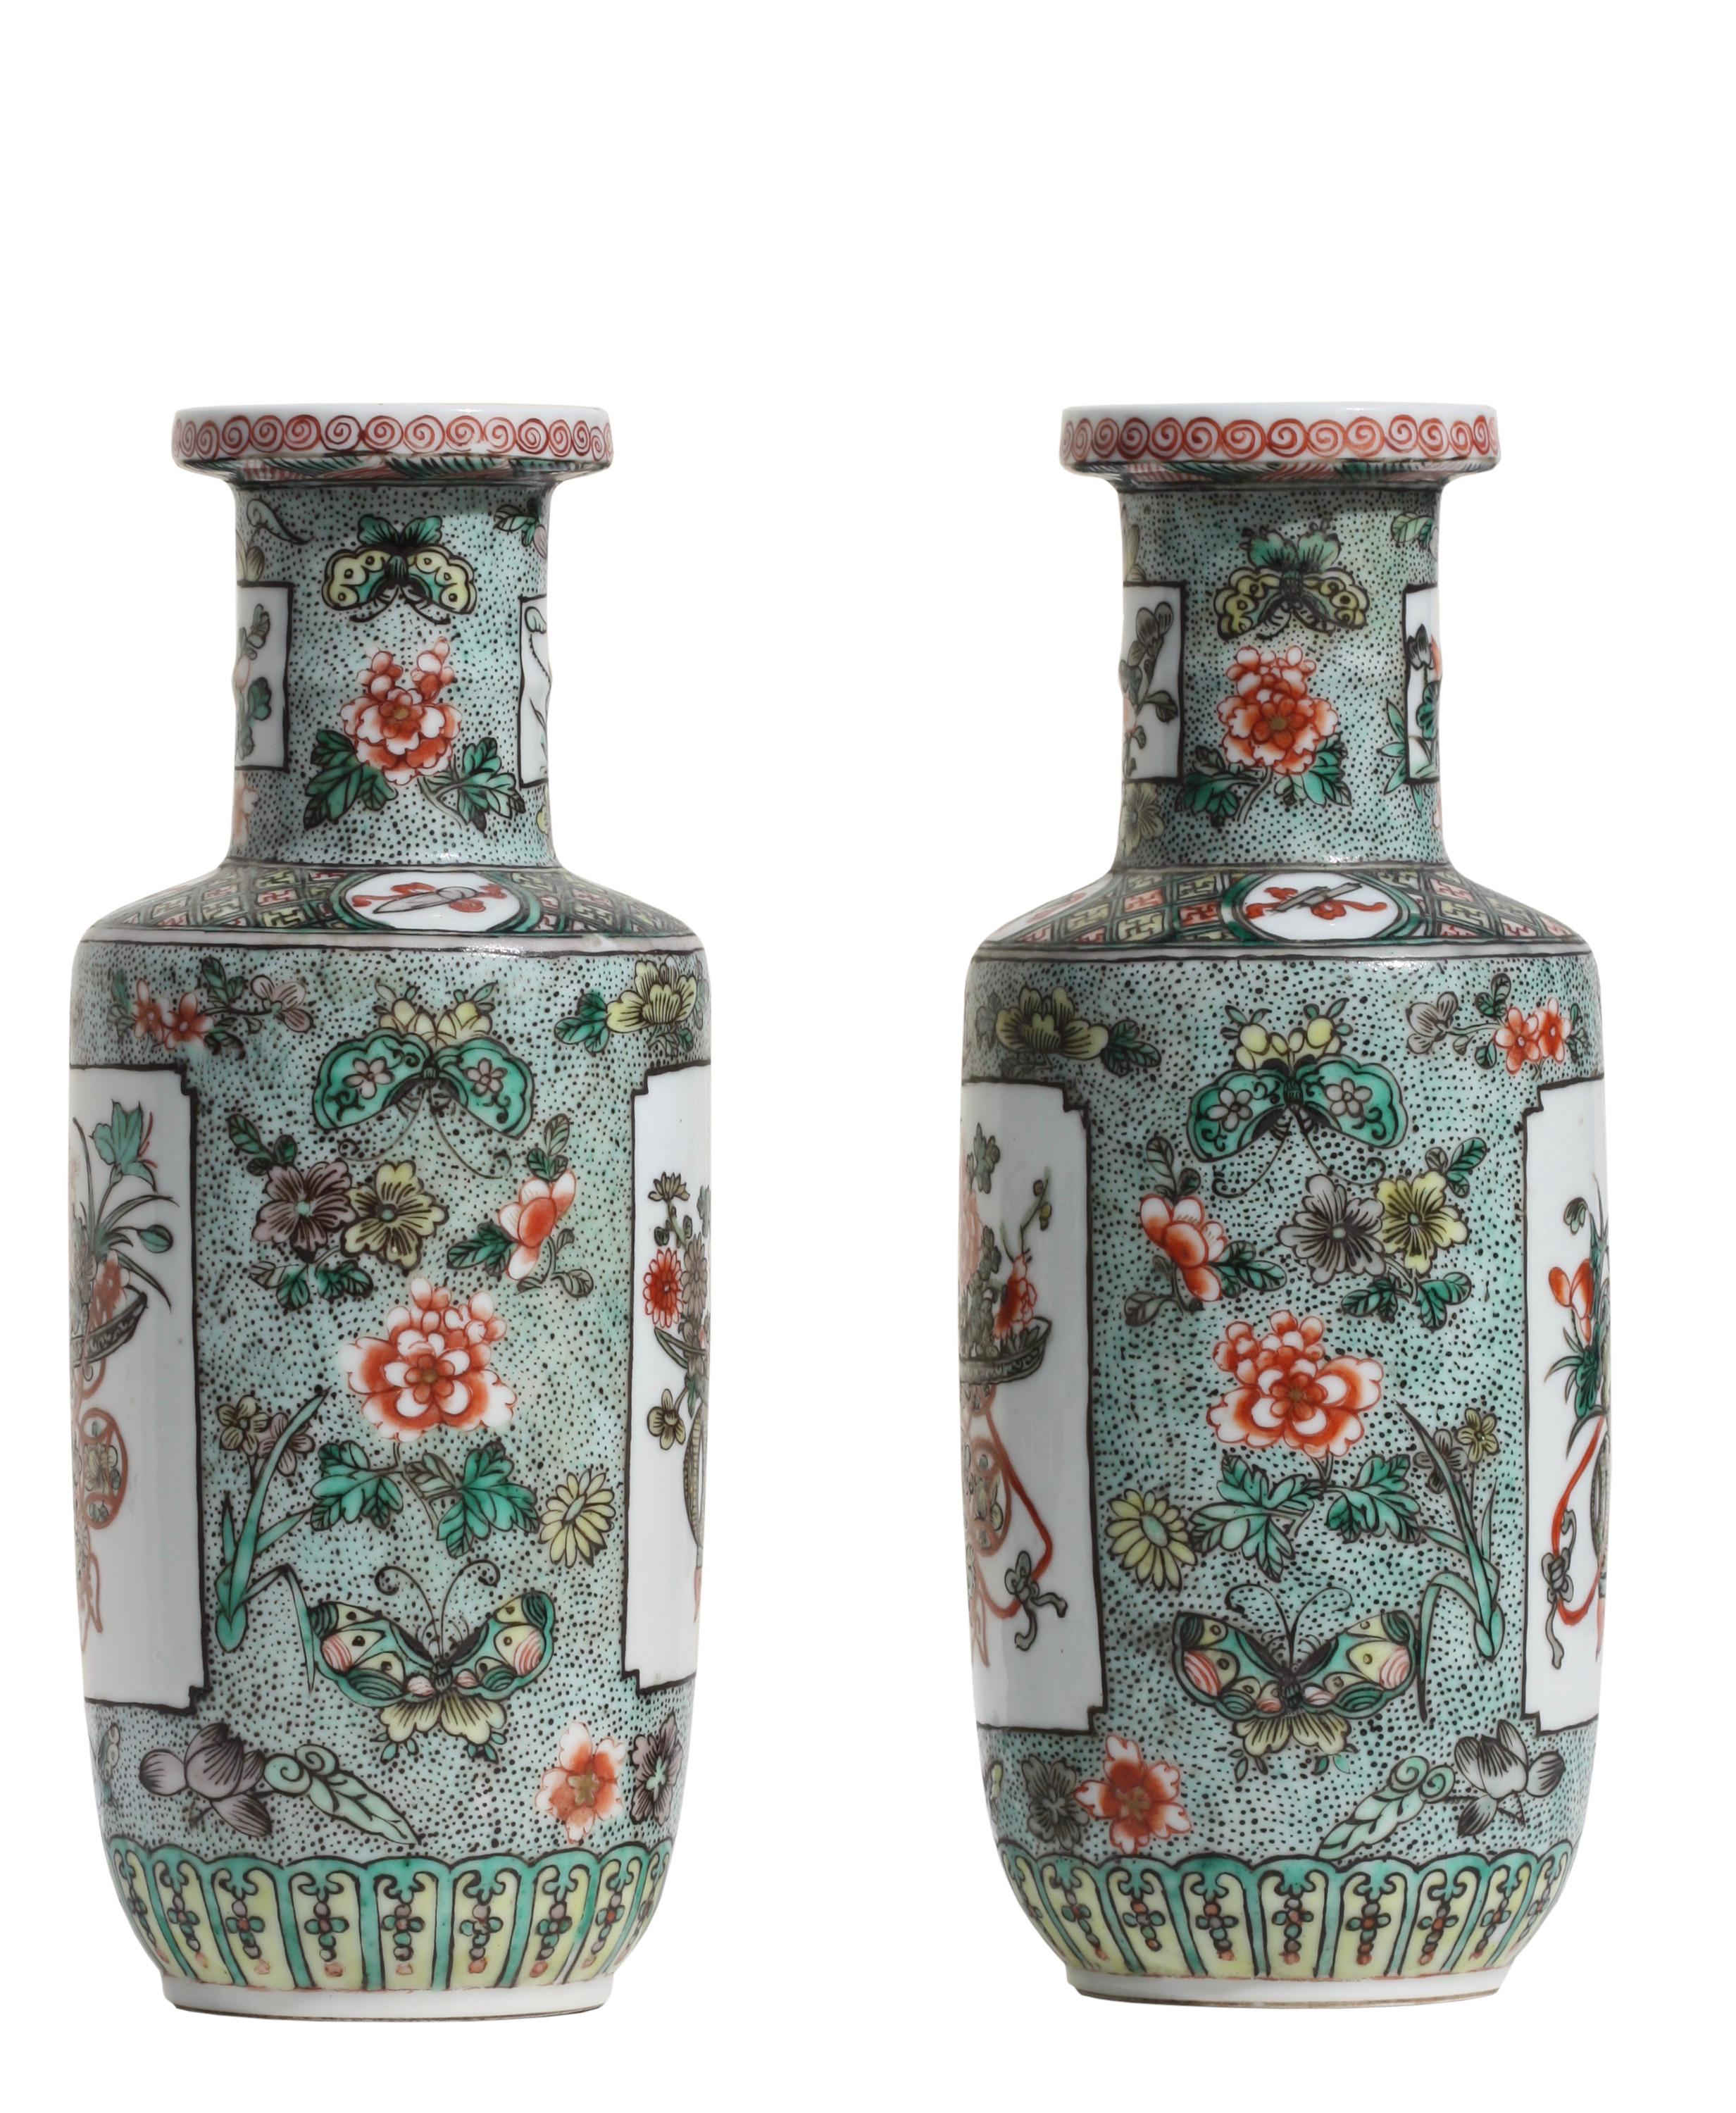 Pair of Chinese Famille Verte Porcelain Vases 19th Century In Good Condition For Sale In West Palm Beach, FL